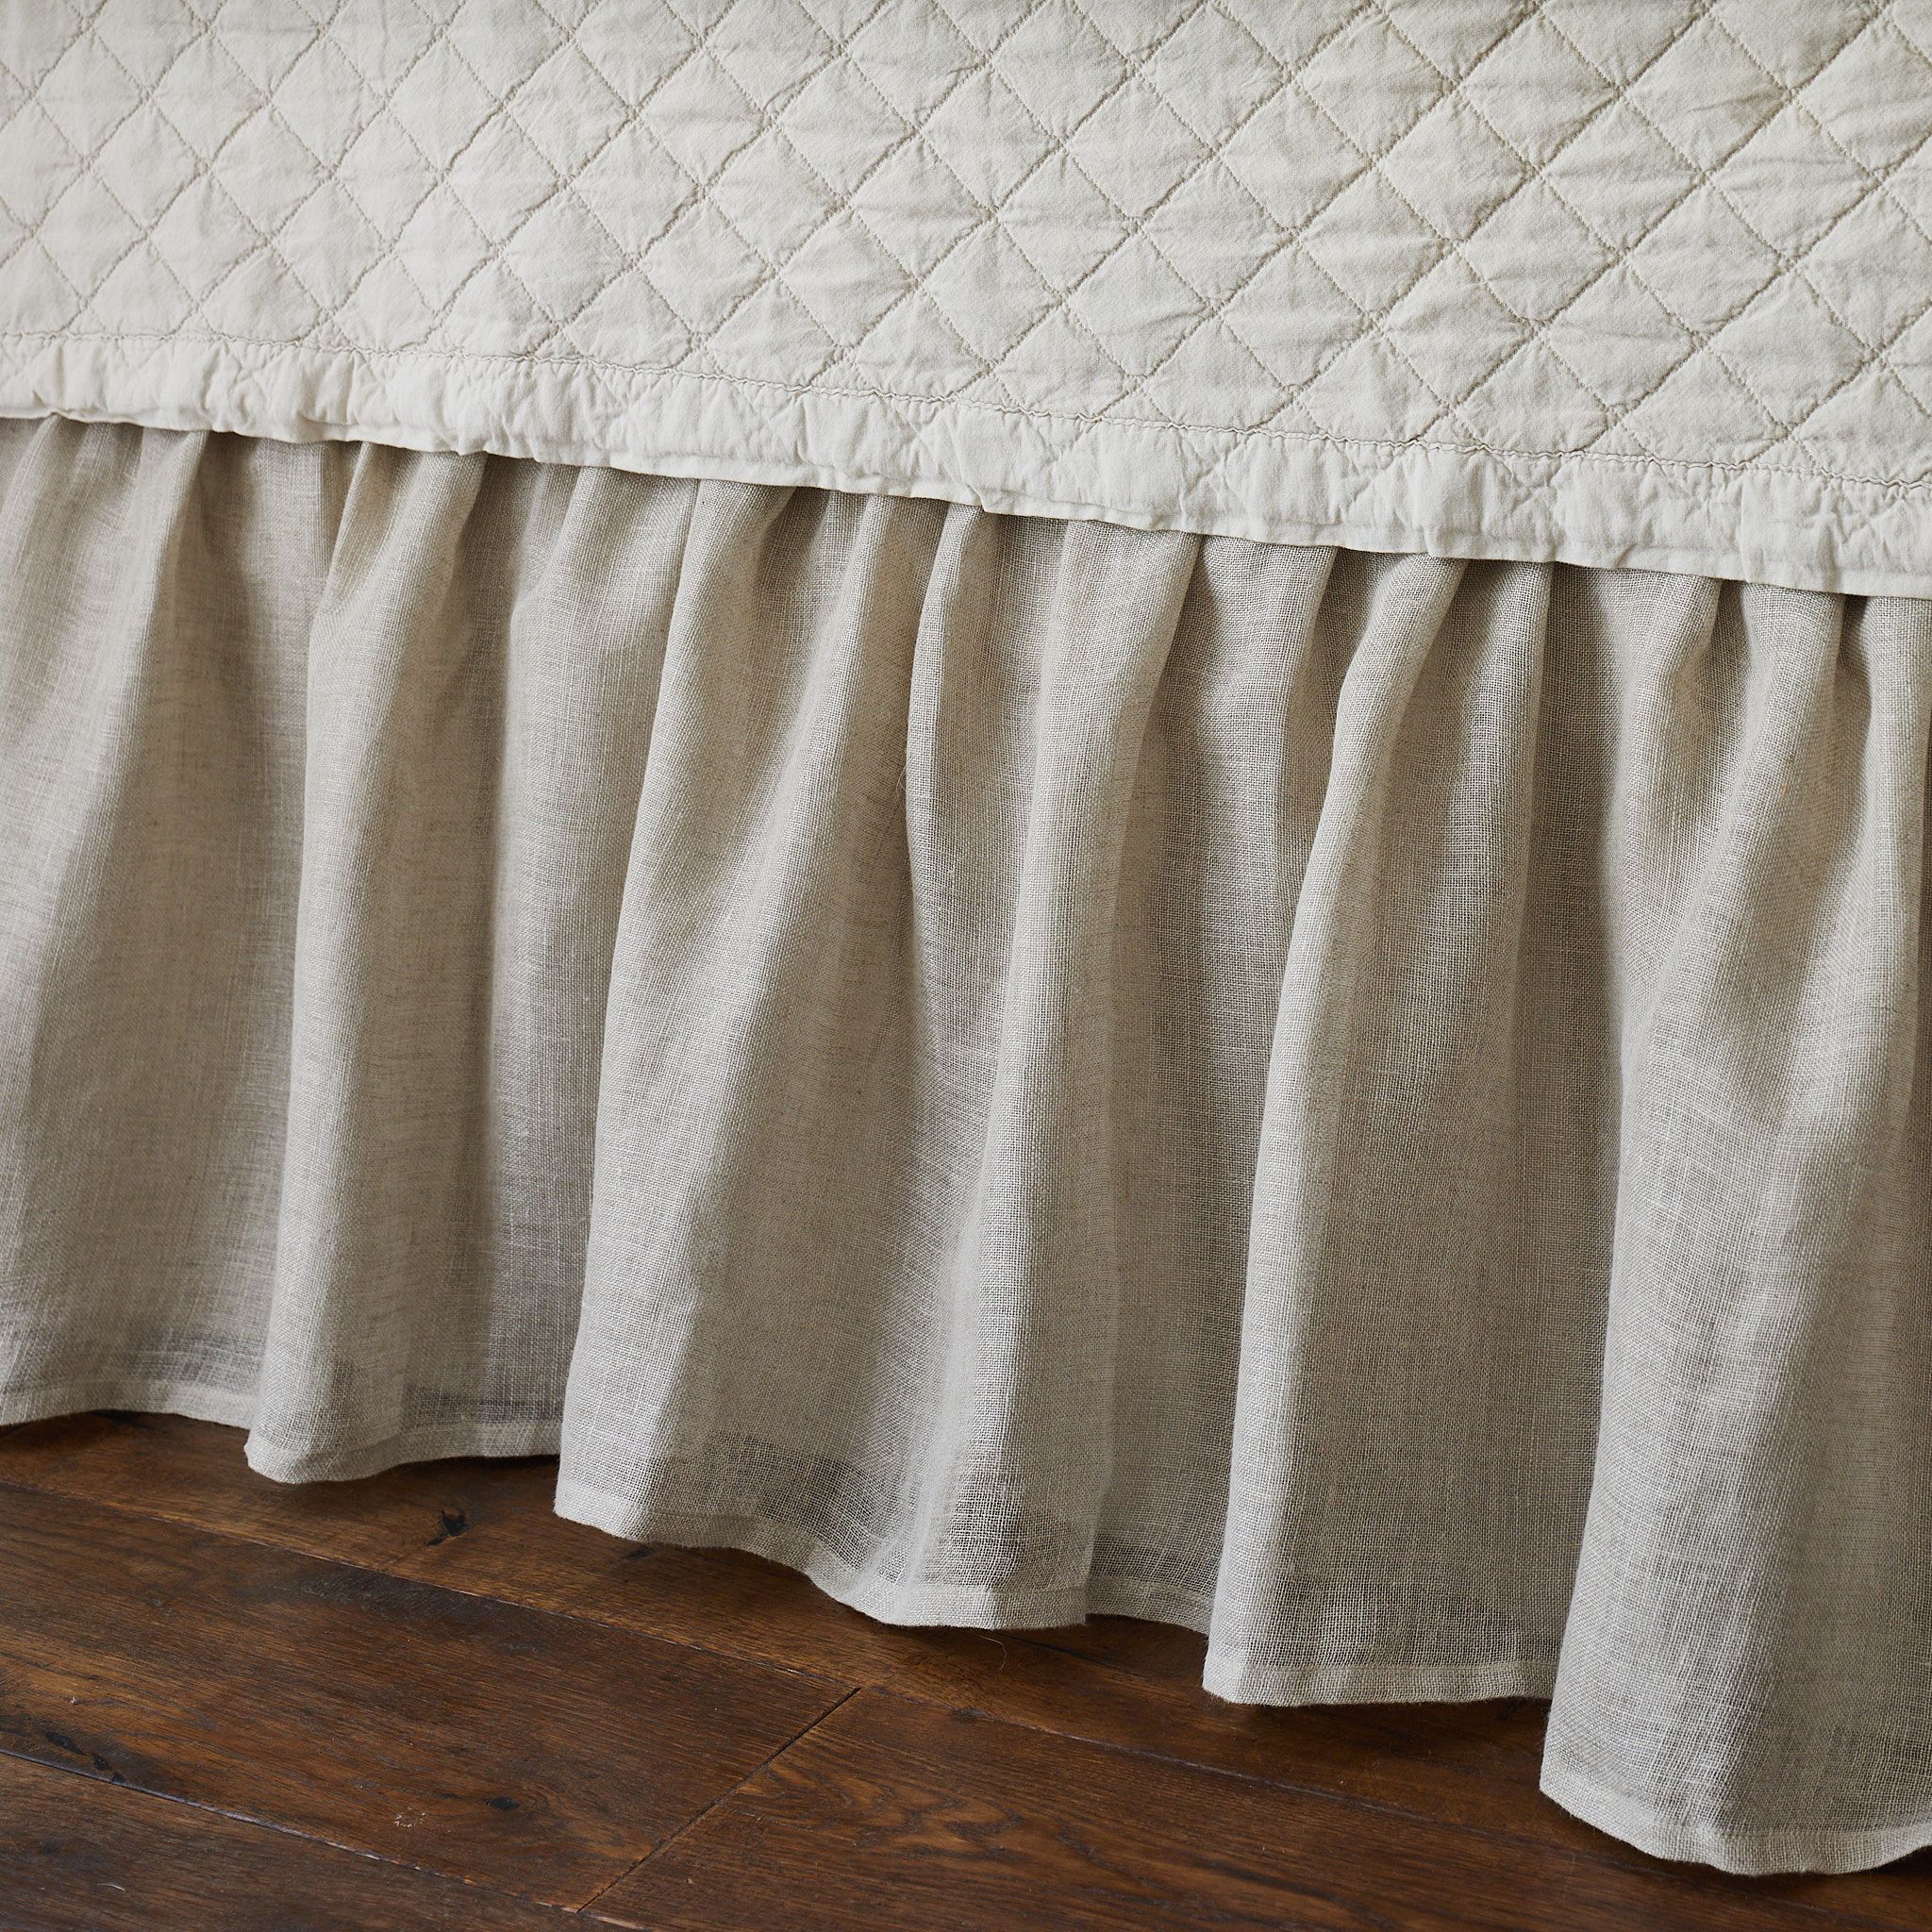 Linen Voile Natural Gathered Bed Skirt, Bedskirts For Twin Beds